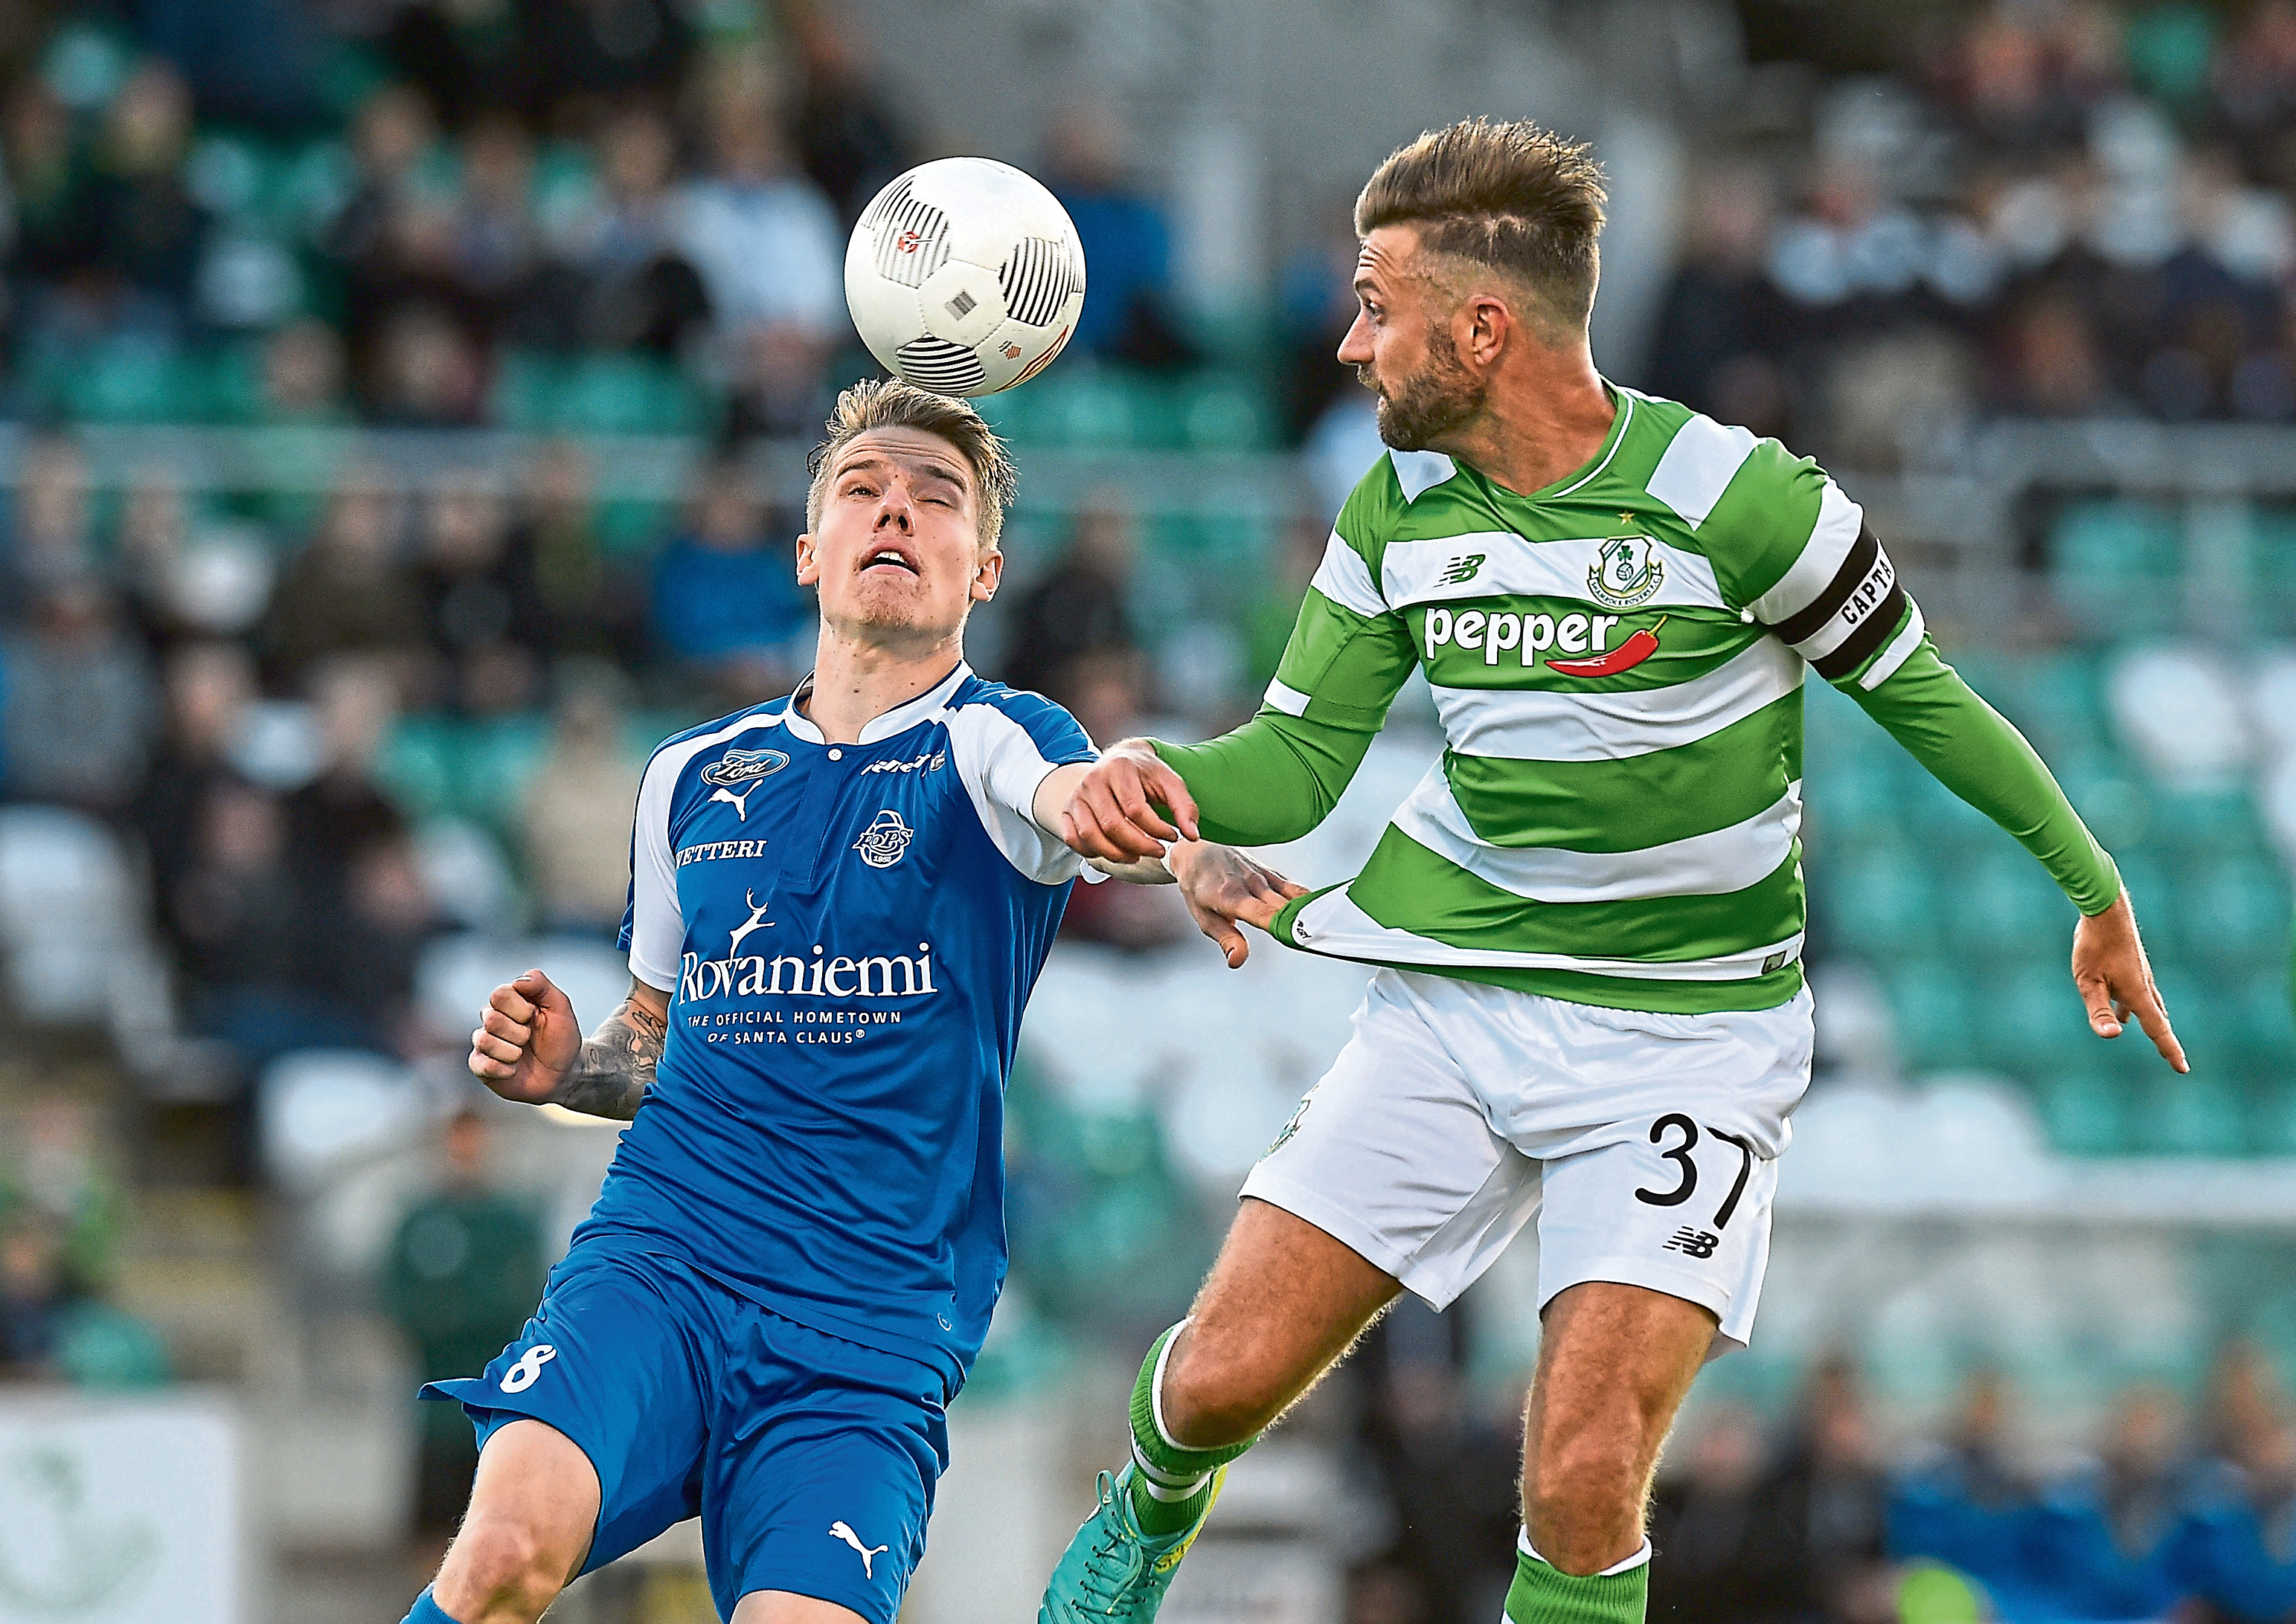 Stephen McPhail of Shamrock Rovers in action against Robert Taylor of RoPS Rovaniemi during the UEFA Europa League First Qualifying Round 1st Leg game between Shamrock Rovers and RoPS Rovaniemi at Tallaght Stadium in Tallaght, Co Dublin. (Photo By David Maher/Sportsfile via Getty Images)